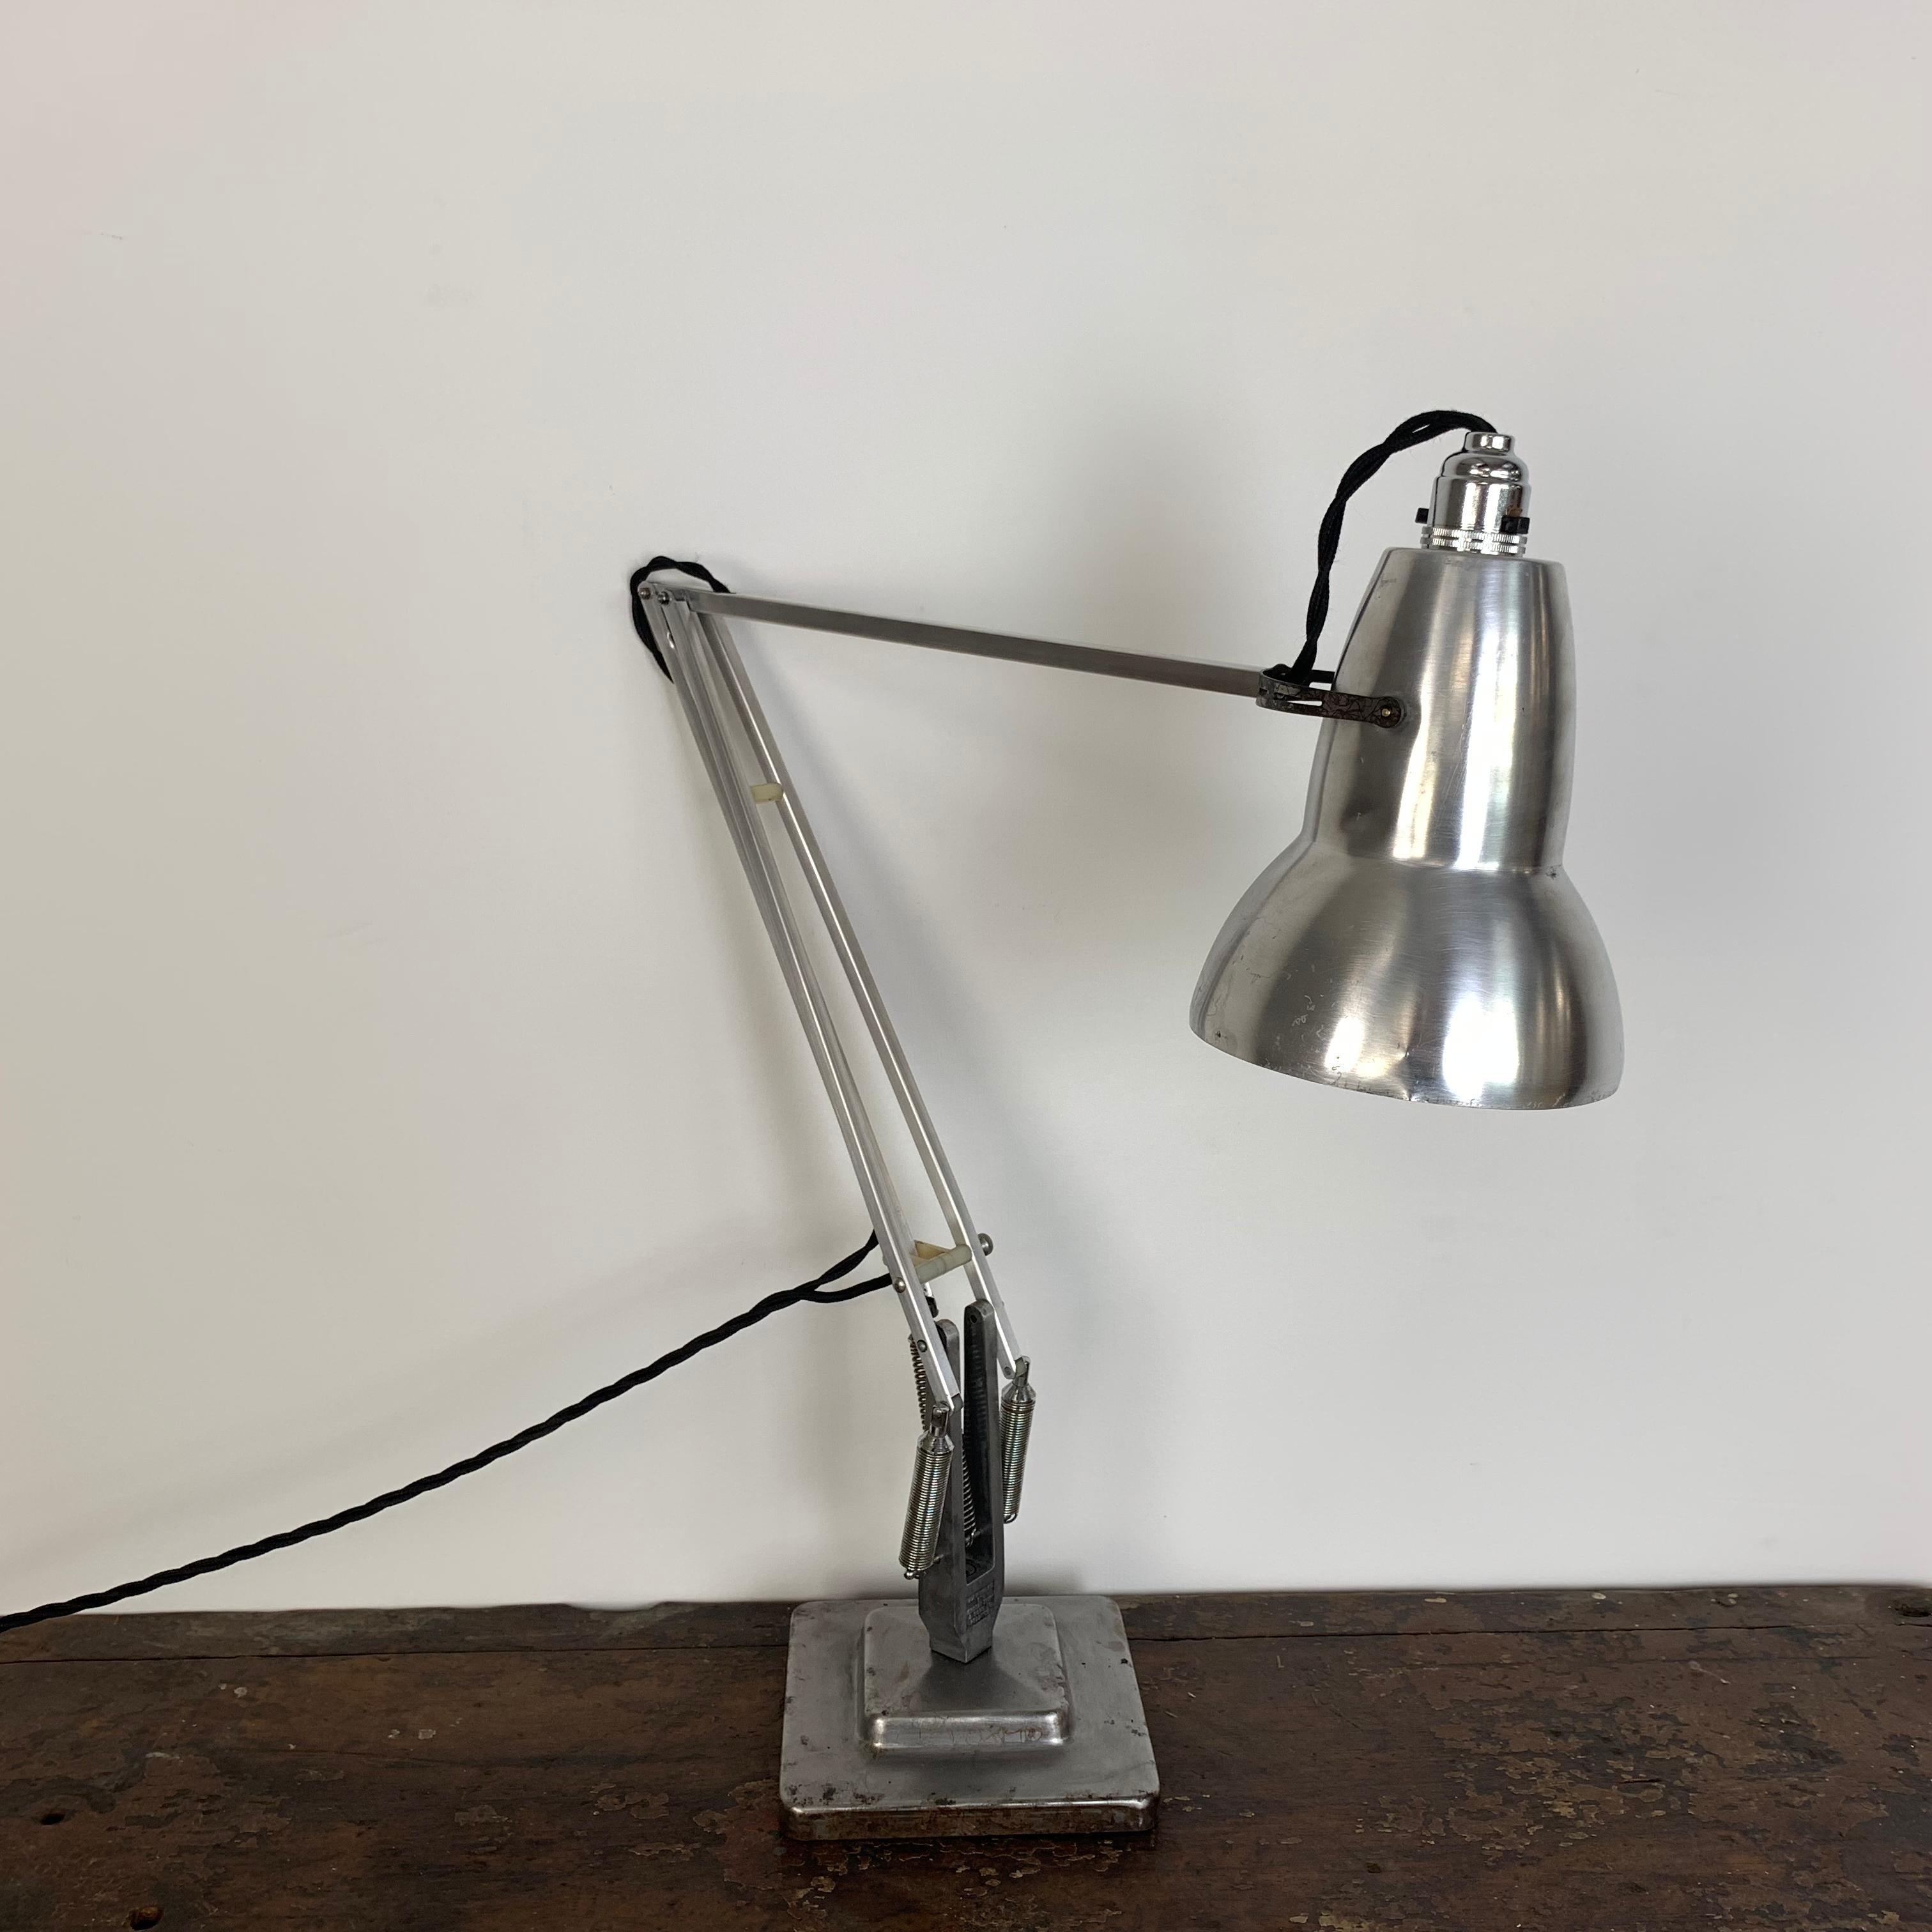 Designed by George Carwardine for Herbert Terry & Sons and made in Redditch, England, this is a lovely example of an original 1930s designed Herbert Terry Anglepoise.

With a tulip shade, two-stepped base and adjustable springs, this is a 1960s